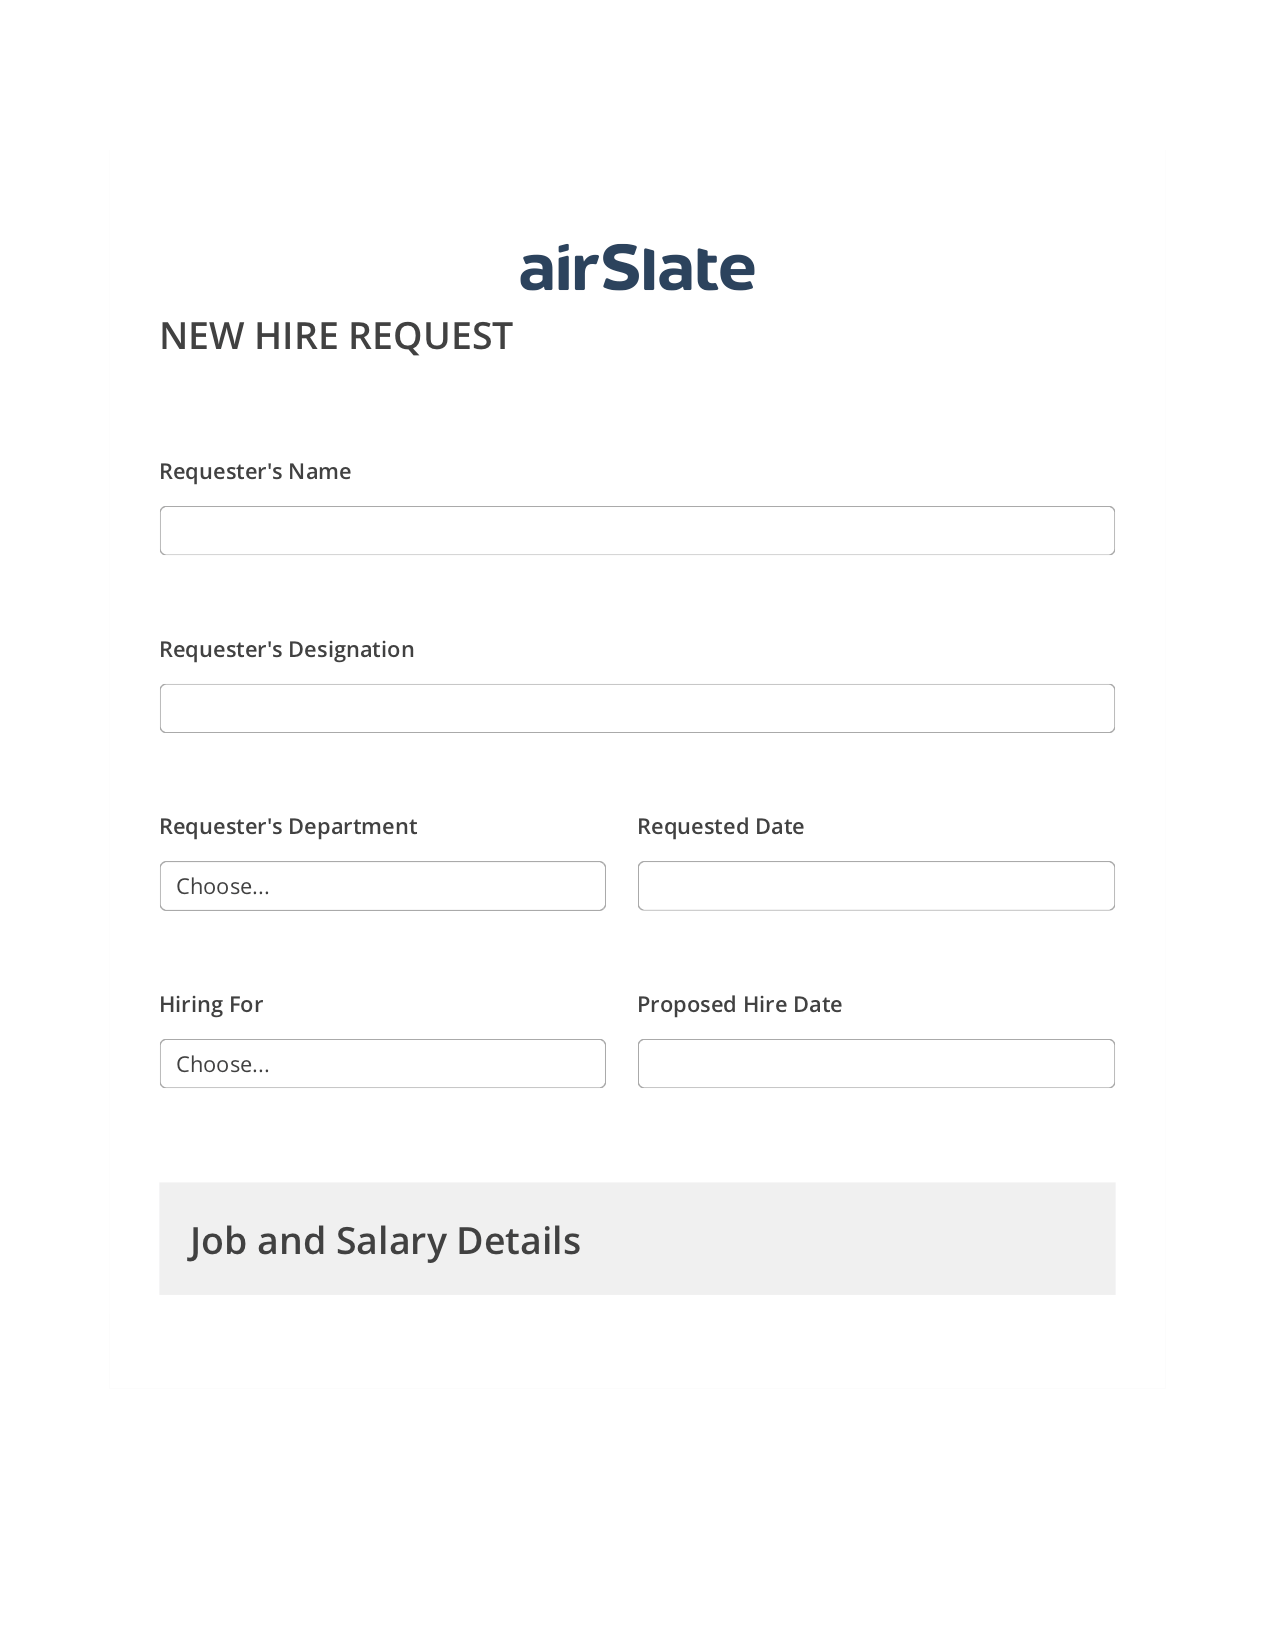 Hiring Request Workflow Prefill from NetSuite records, Lock the Slate Bot, Export to Salesforce Record Bot